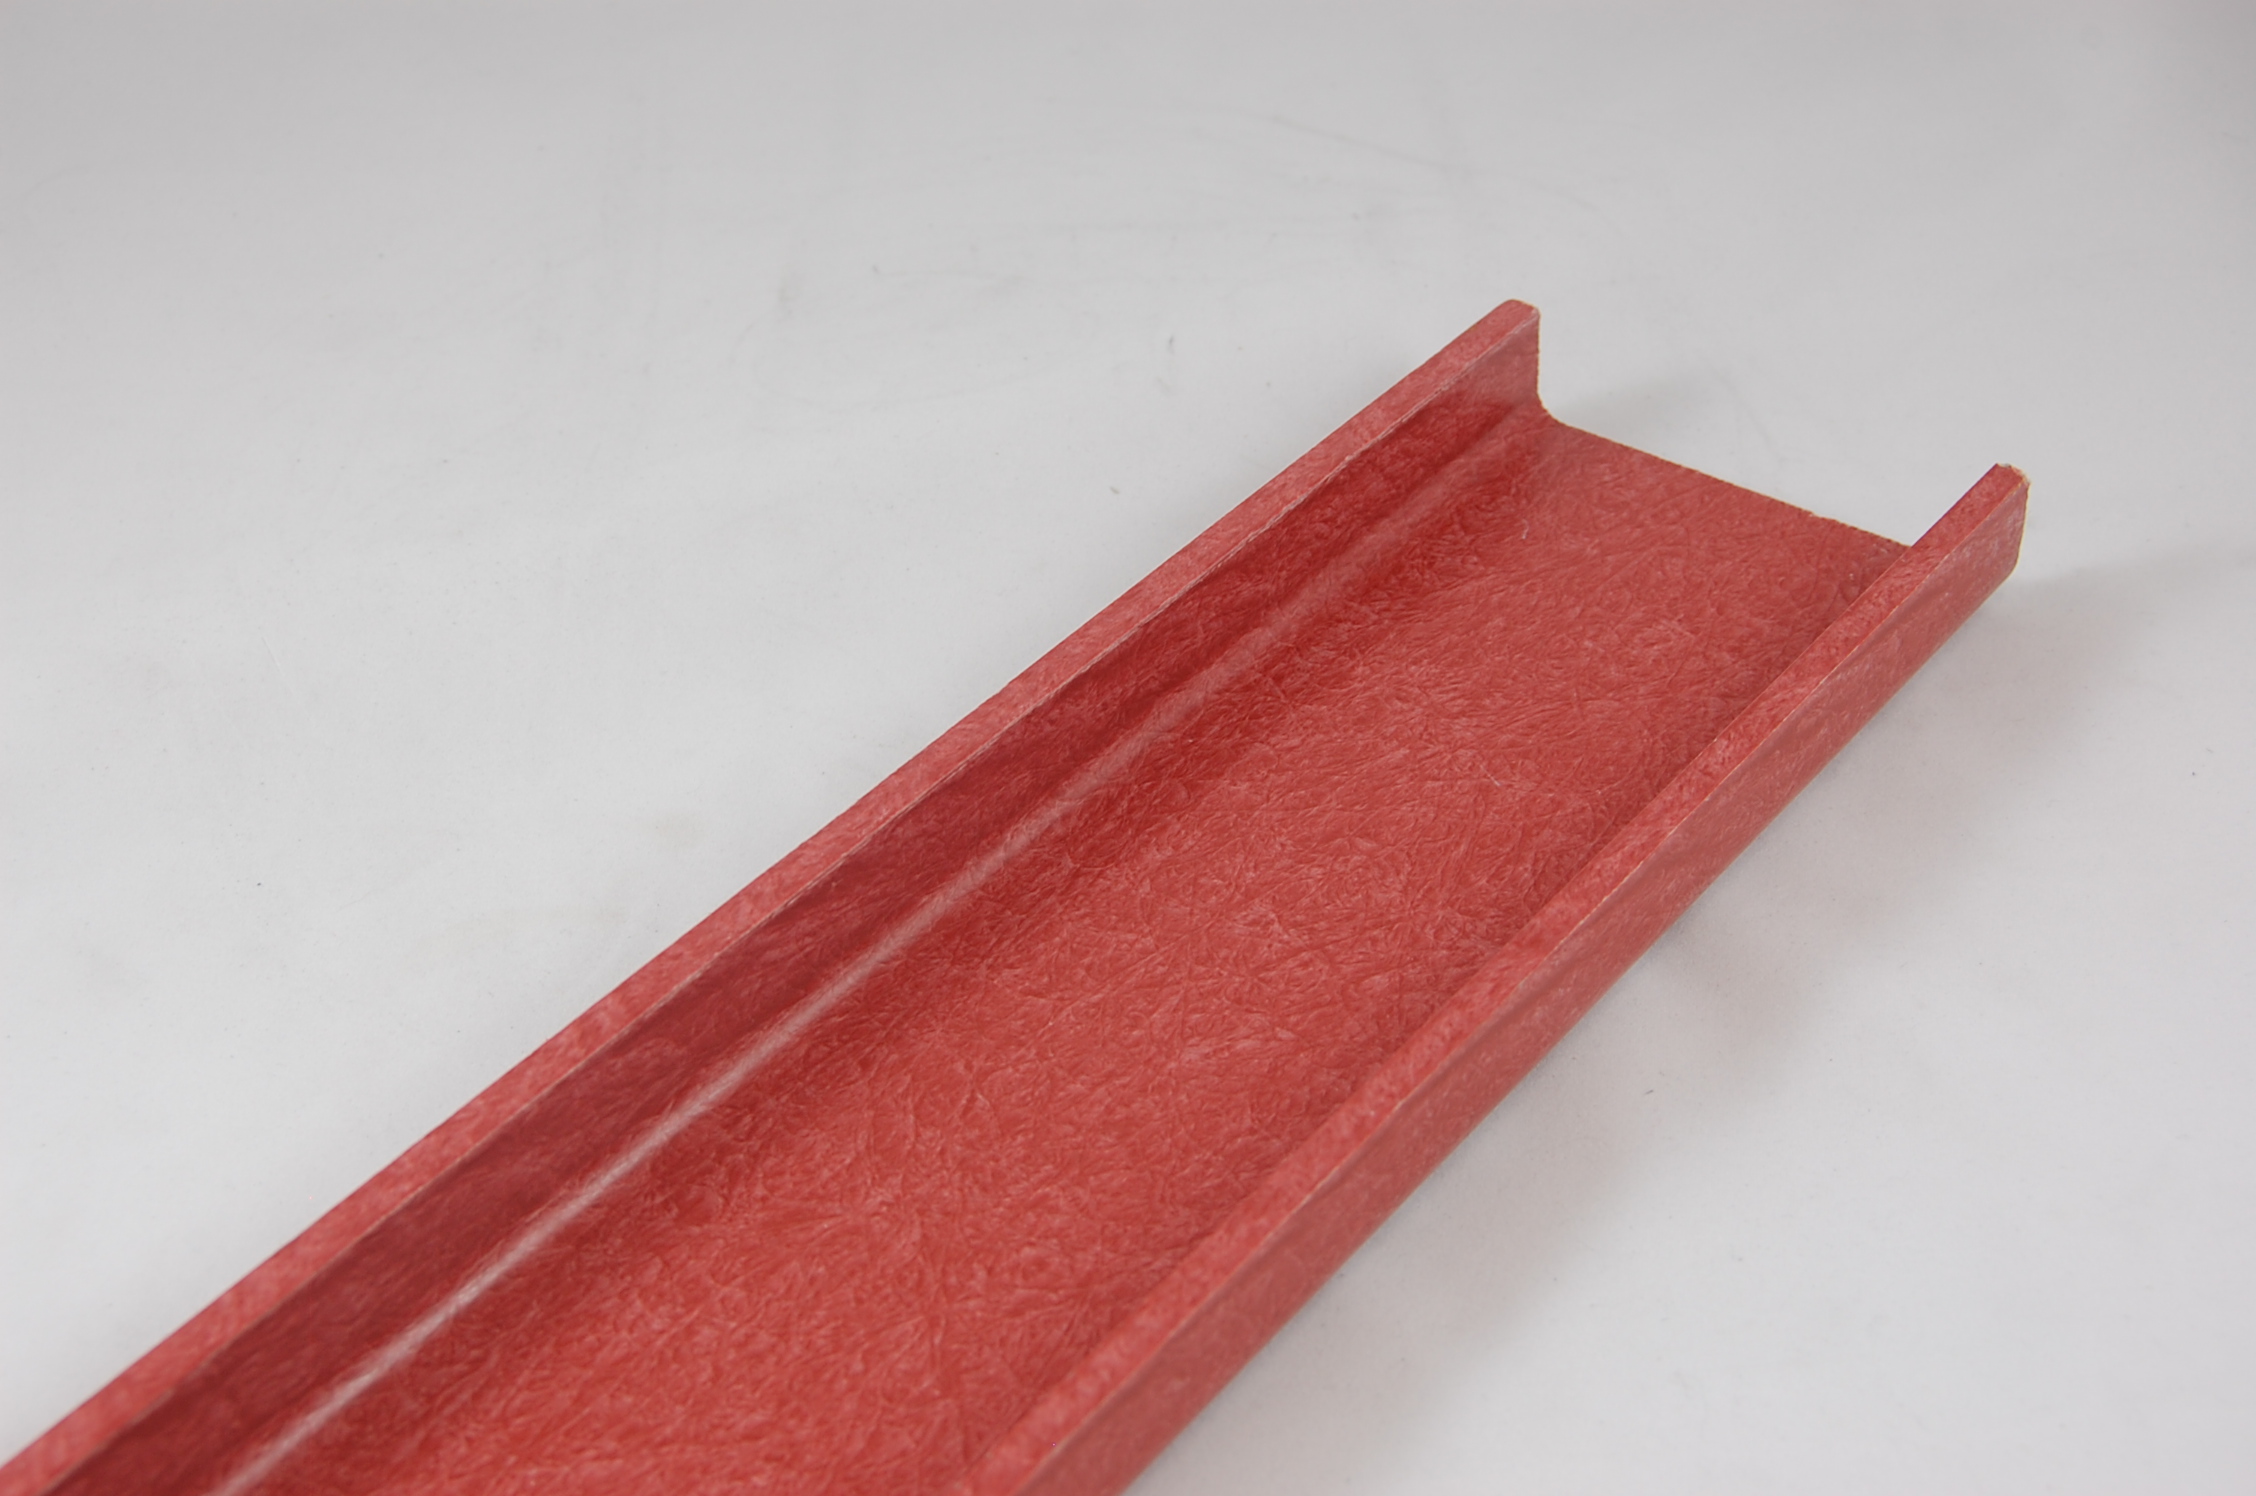 11-9/32"W x 1 5/8" Leg x 3/8" thick GLASROD® Grade 1130 Fiberglass-Reinforced Polyester Laminate Channel, red,  120"L channel